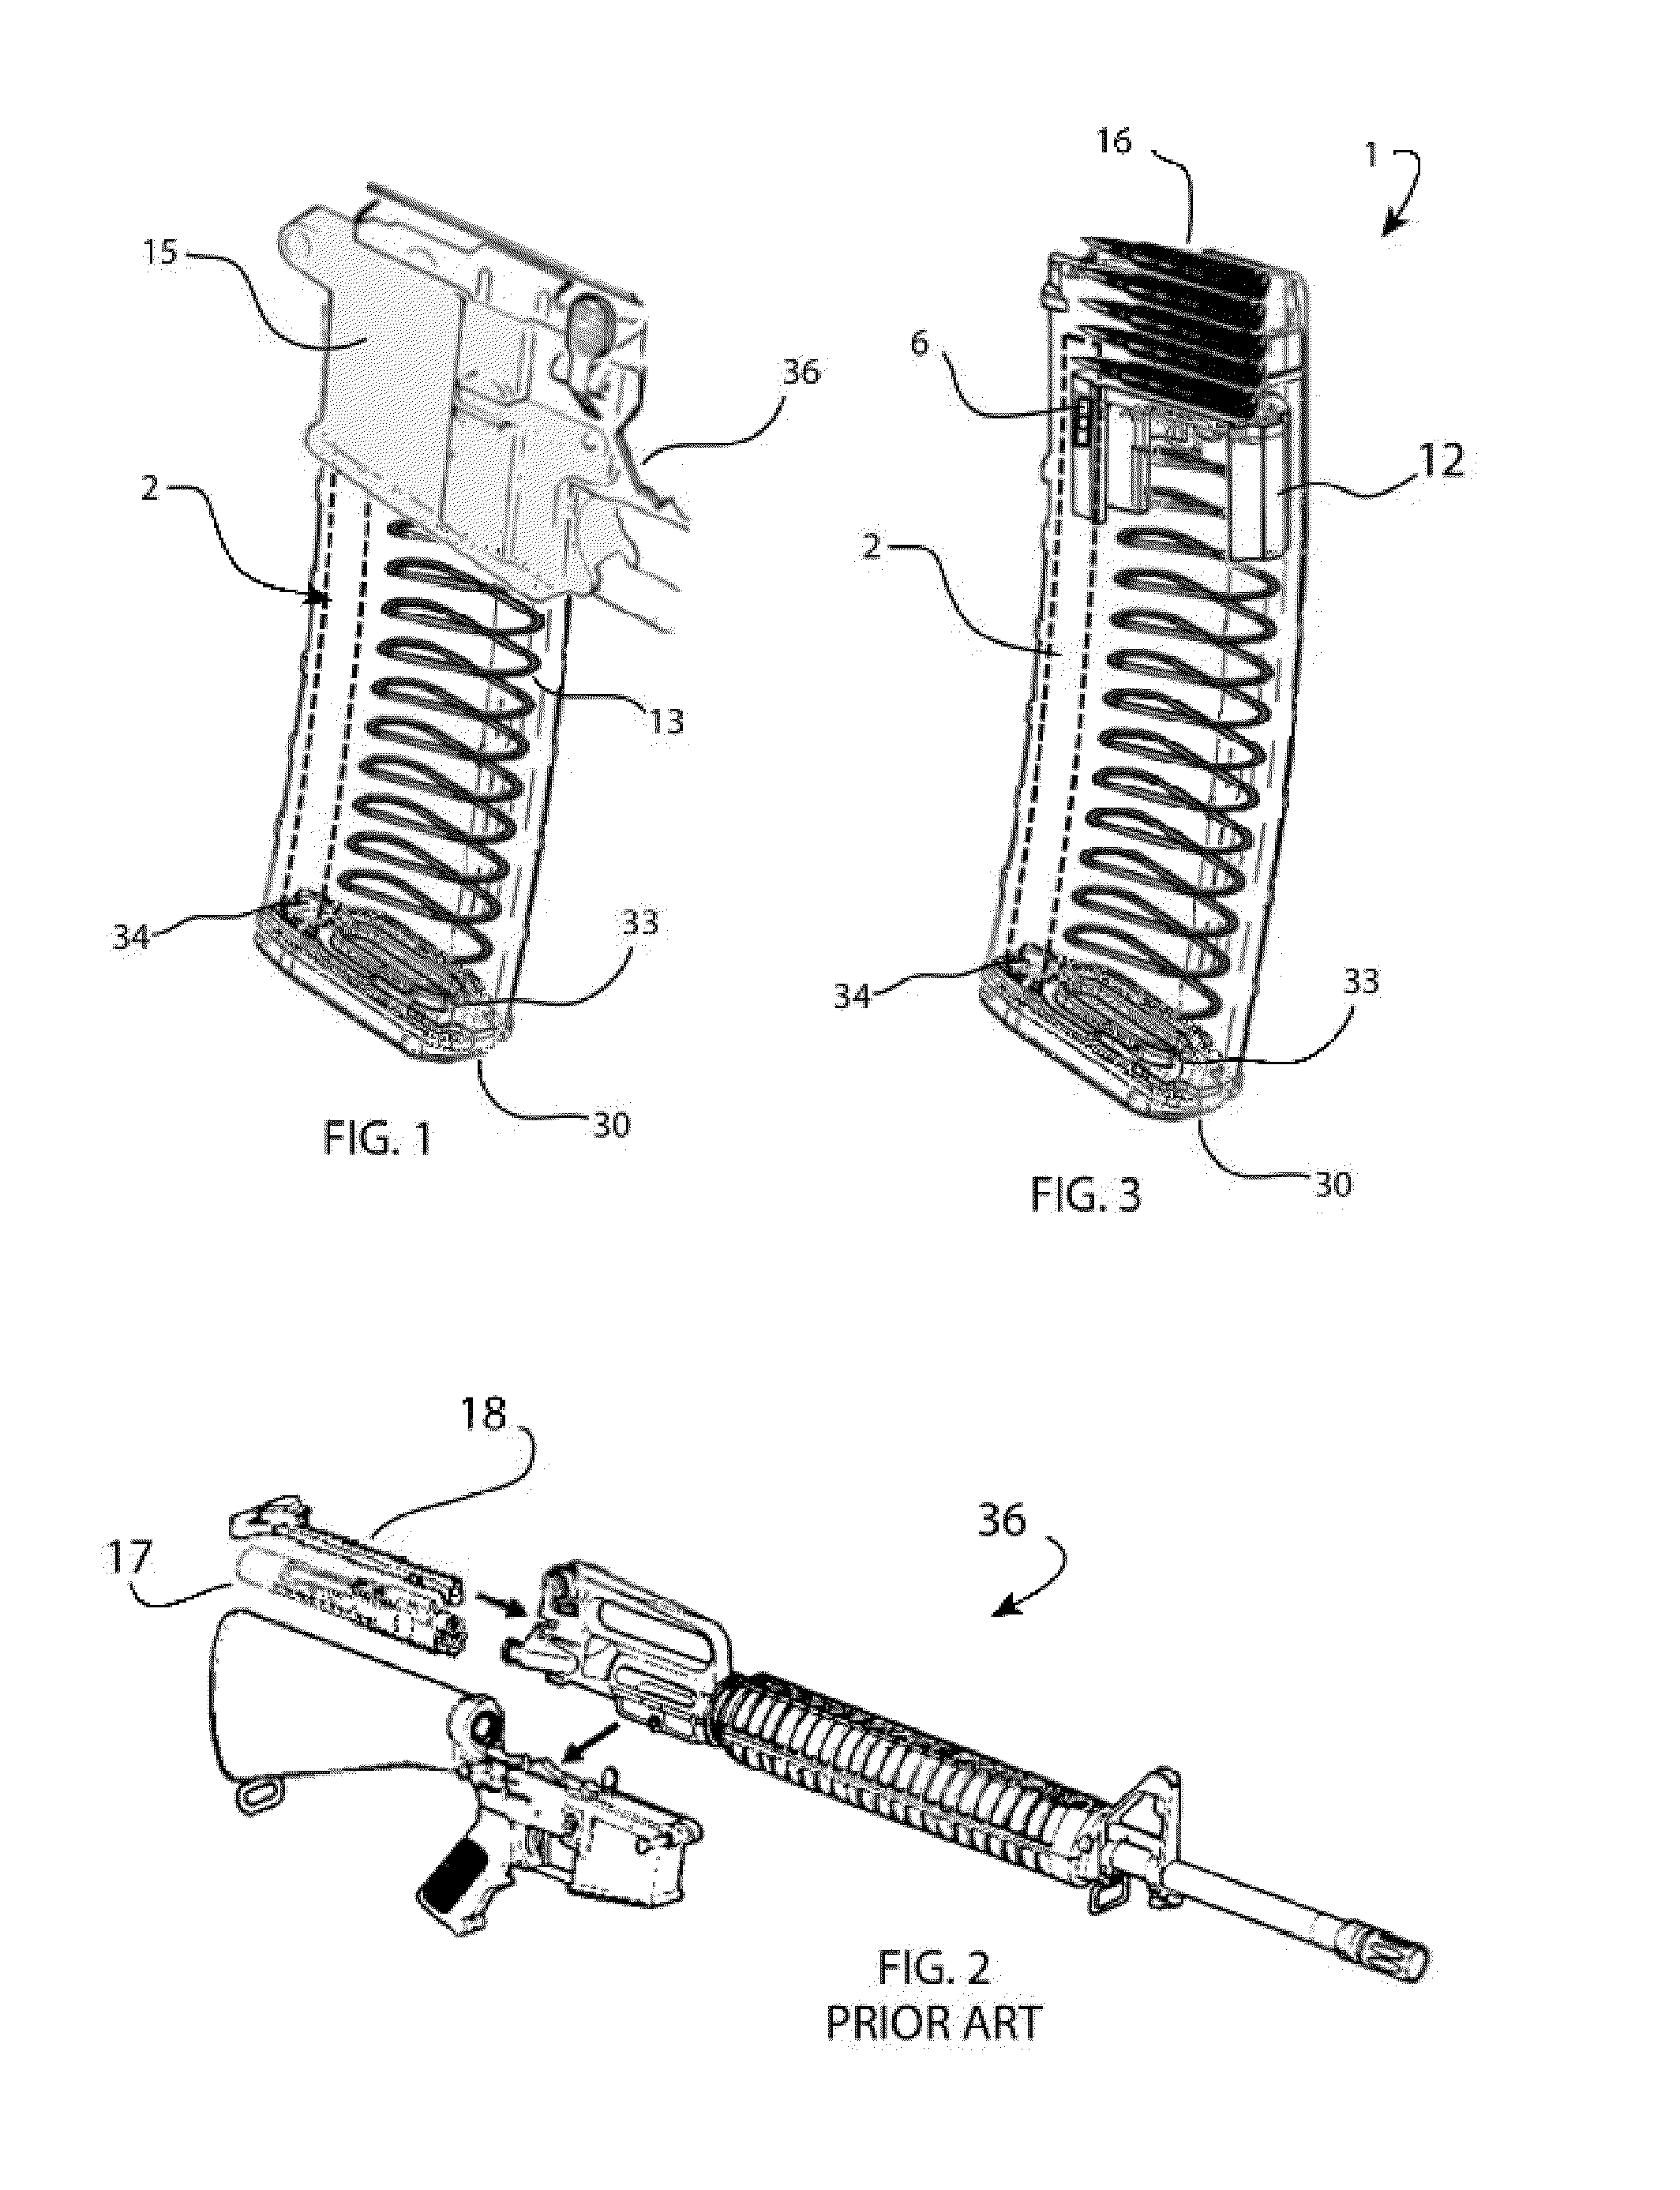 Wireless dual module system for sensing and indicating the ammunition capacity of a firearm magazine